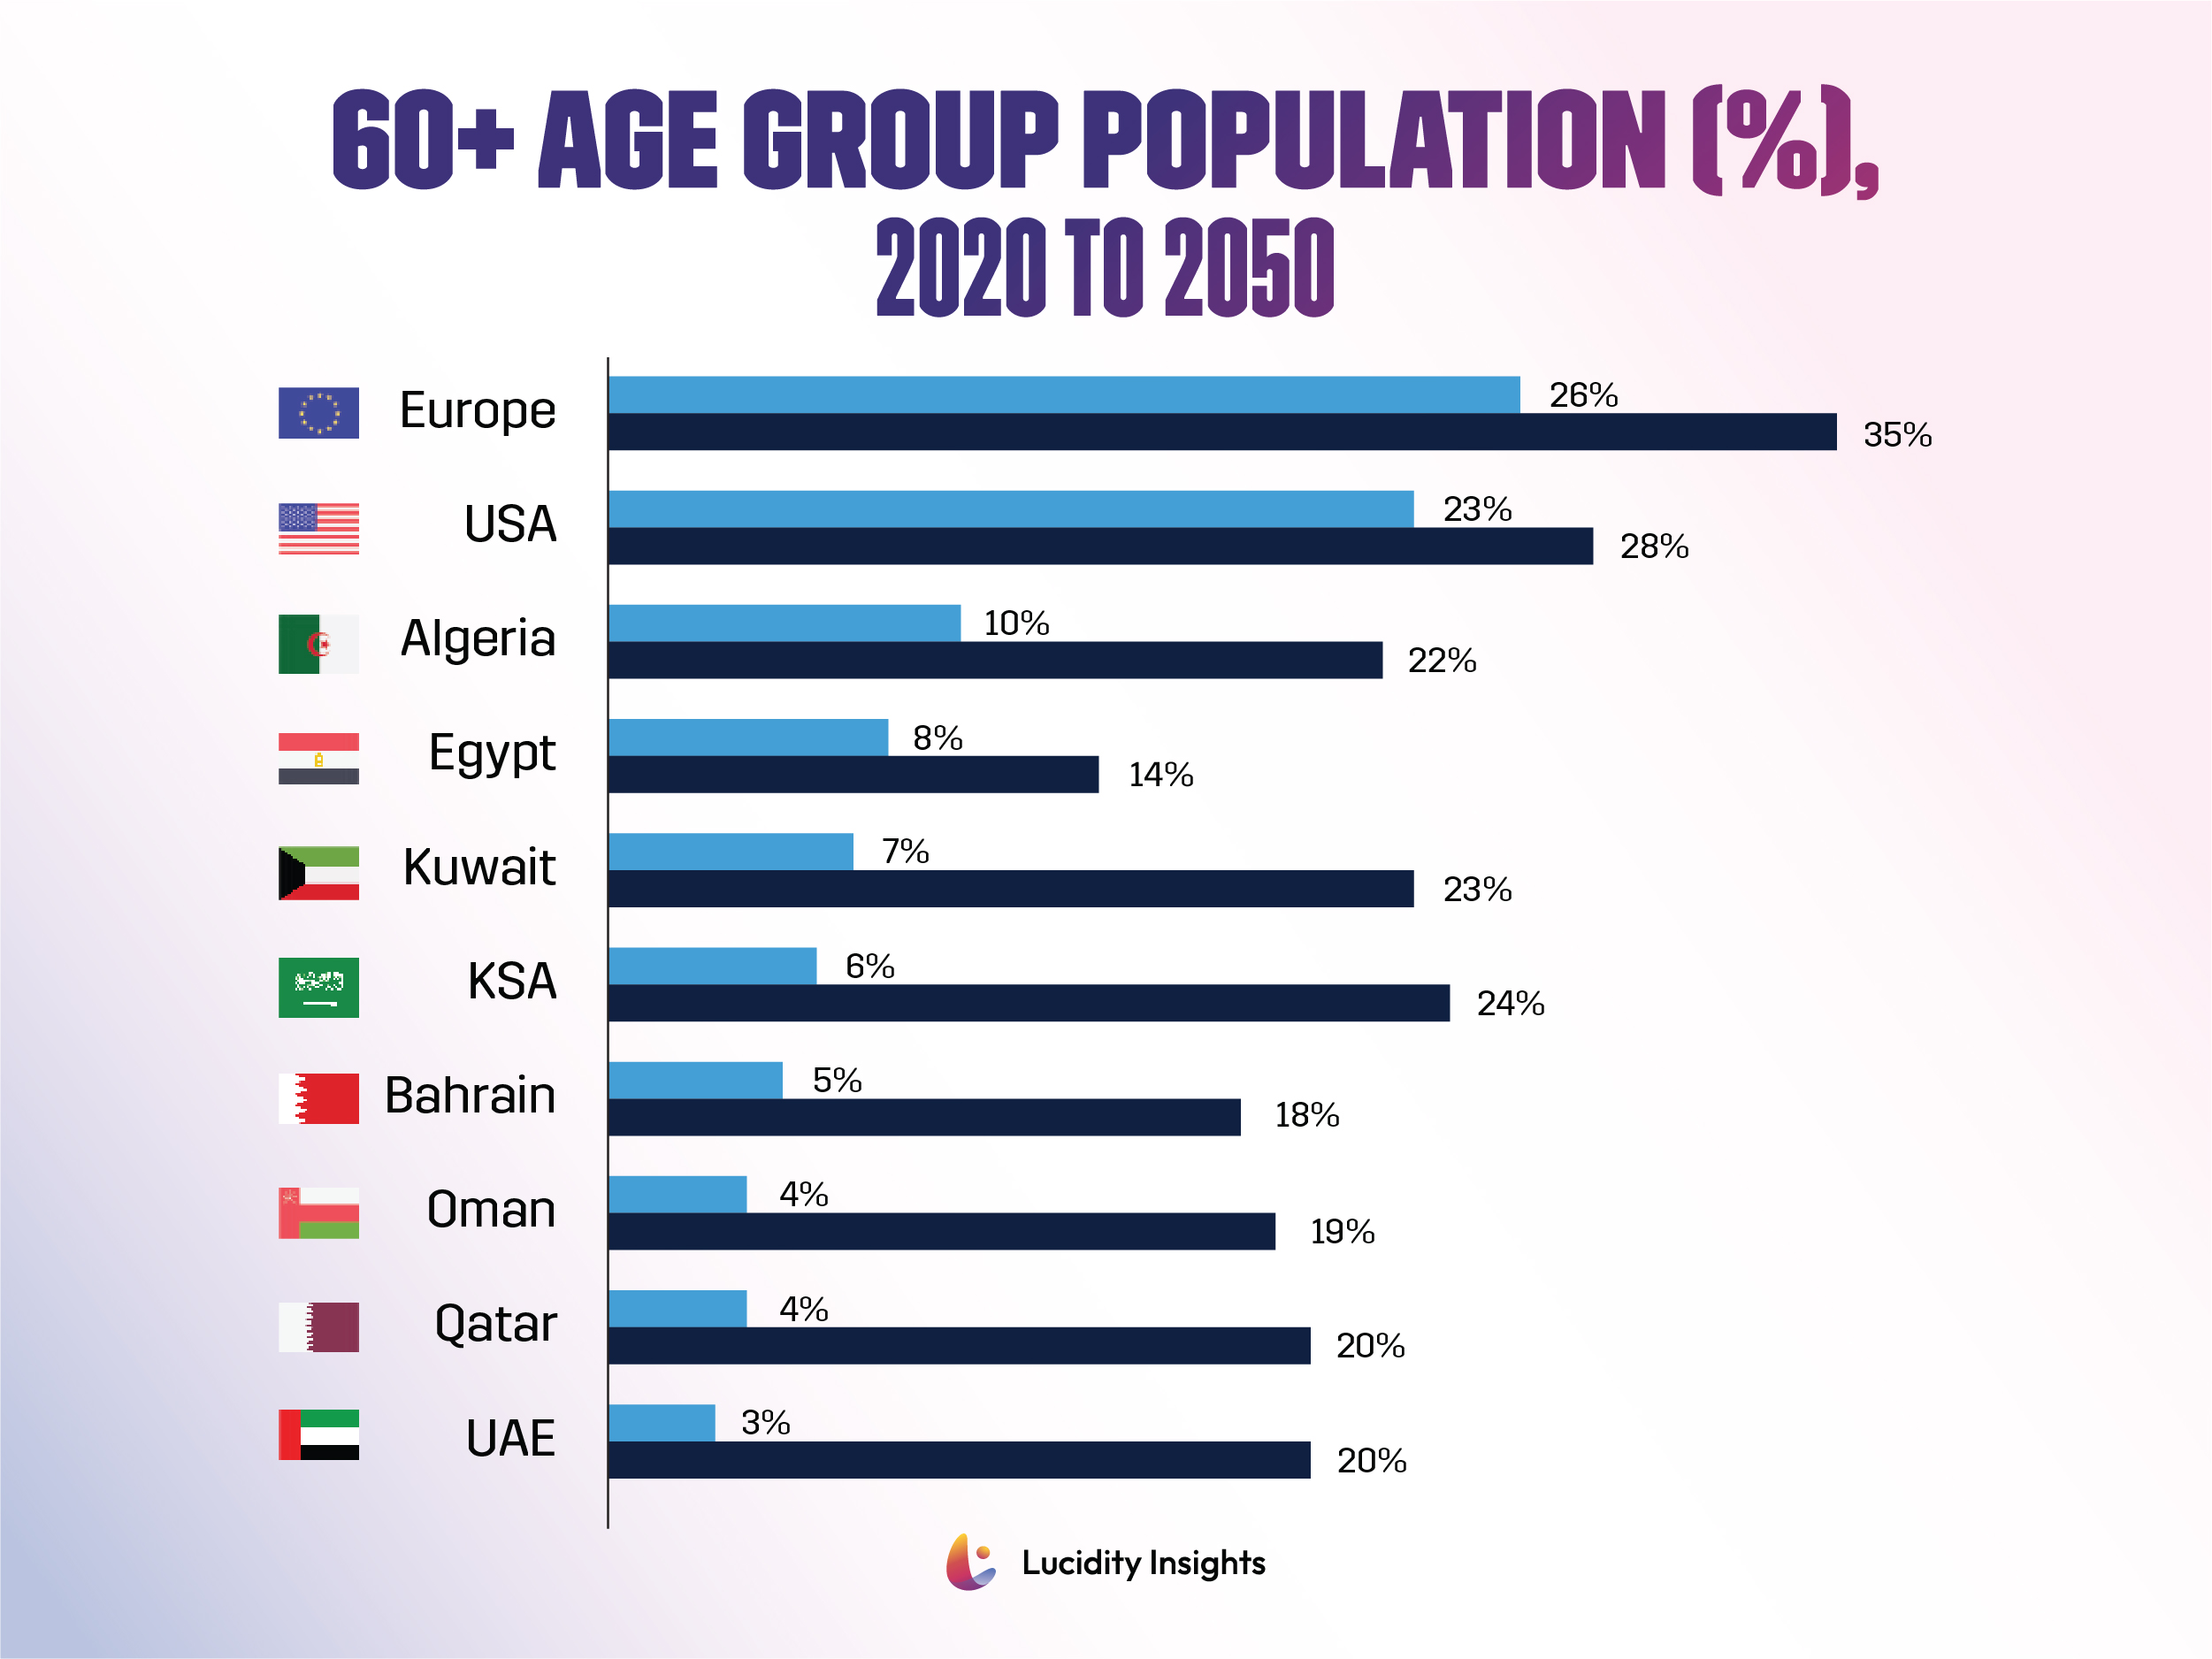 MENA 60+ Age Group Population (%), 2020 to 2050